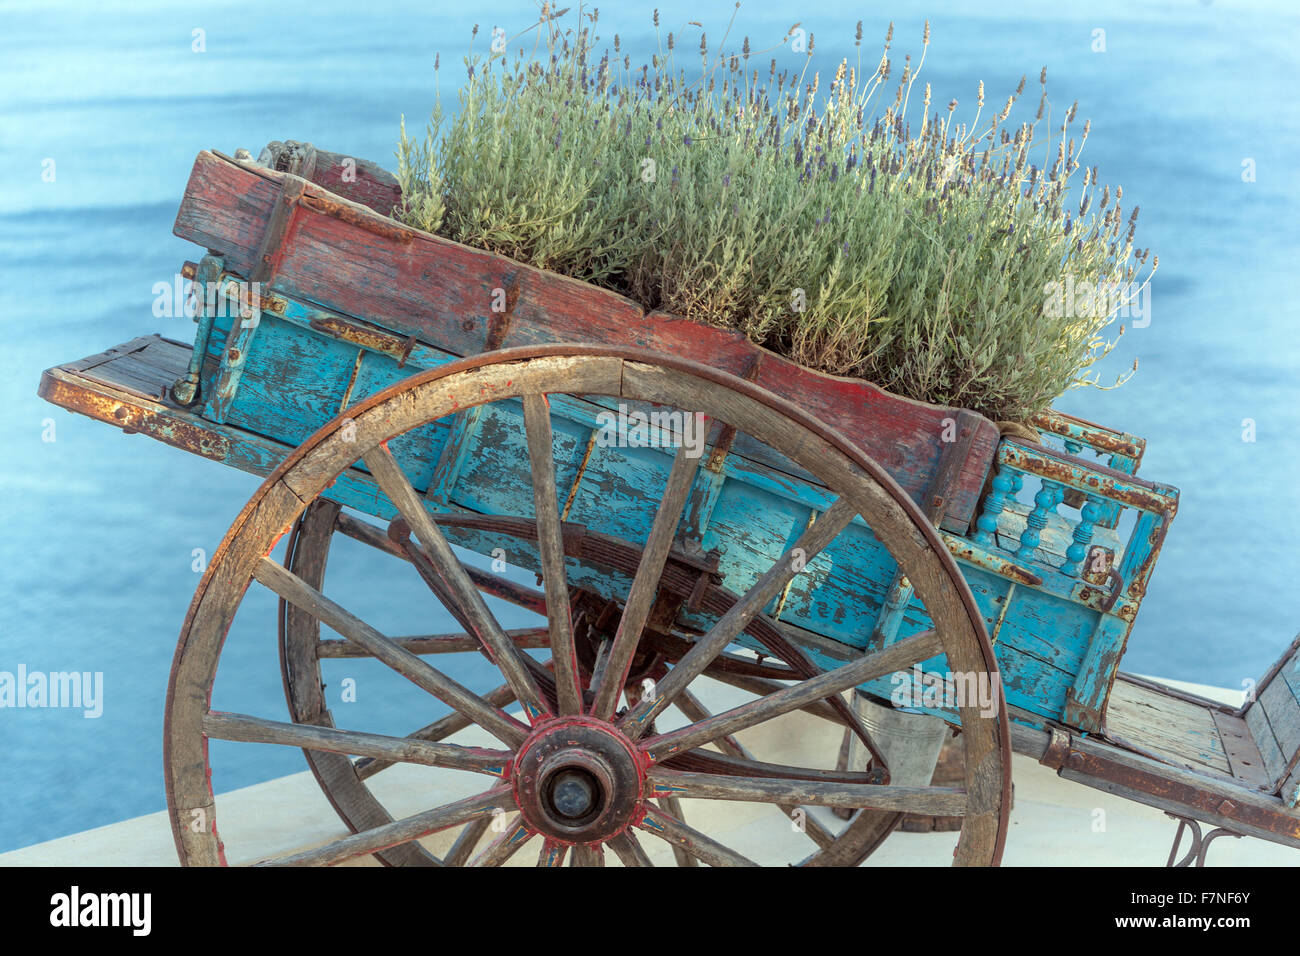 Lavender well-being, growing in an old decorative cart Oia Santorini Cyclades Greek Islands Greece wooden cart on the roof above sea wooden wheel cart Stock Photo